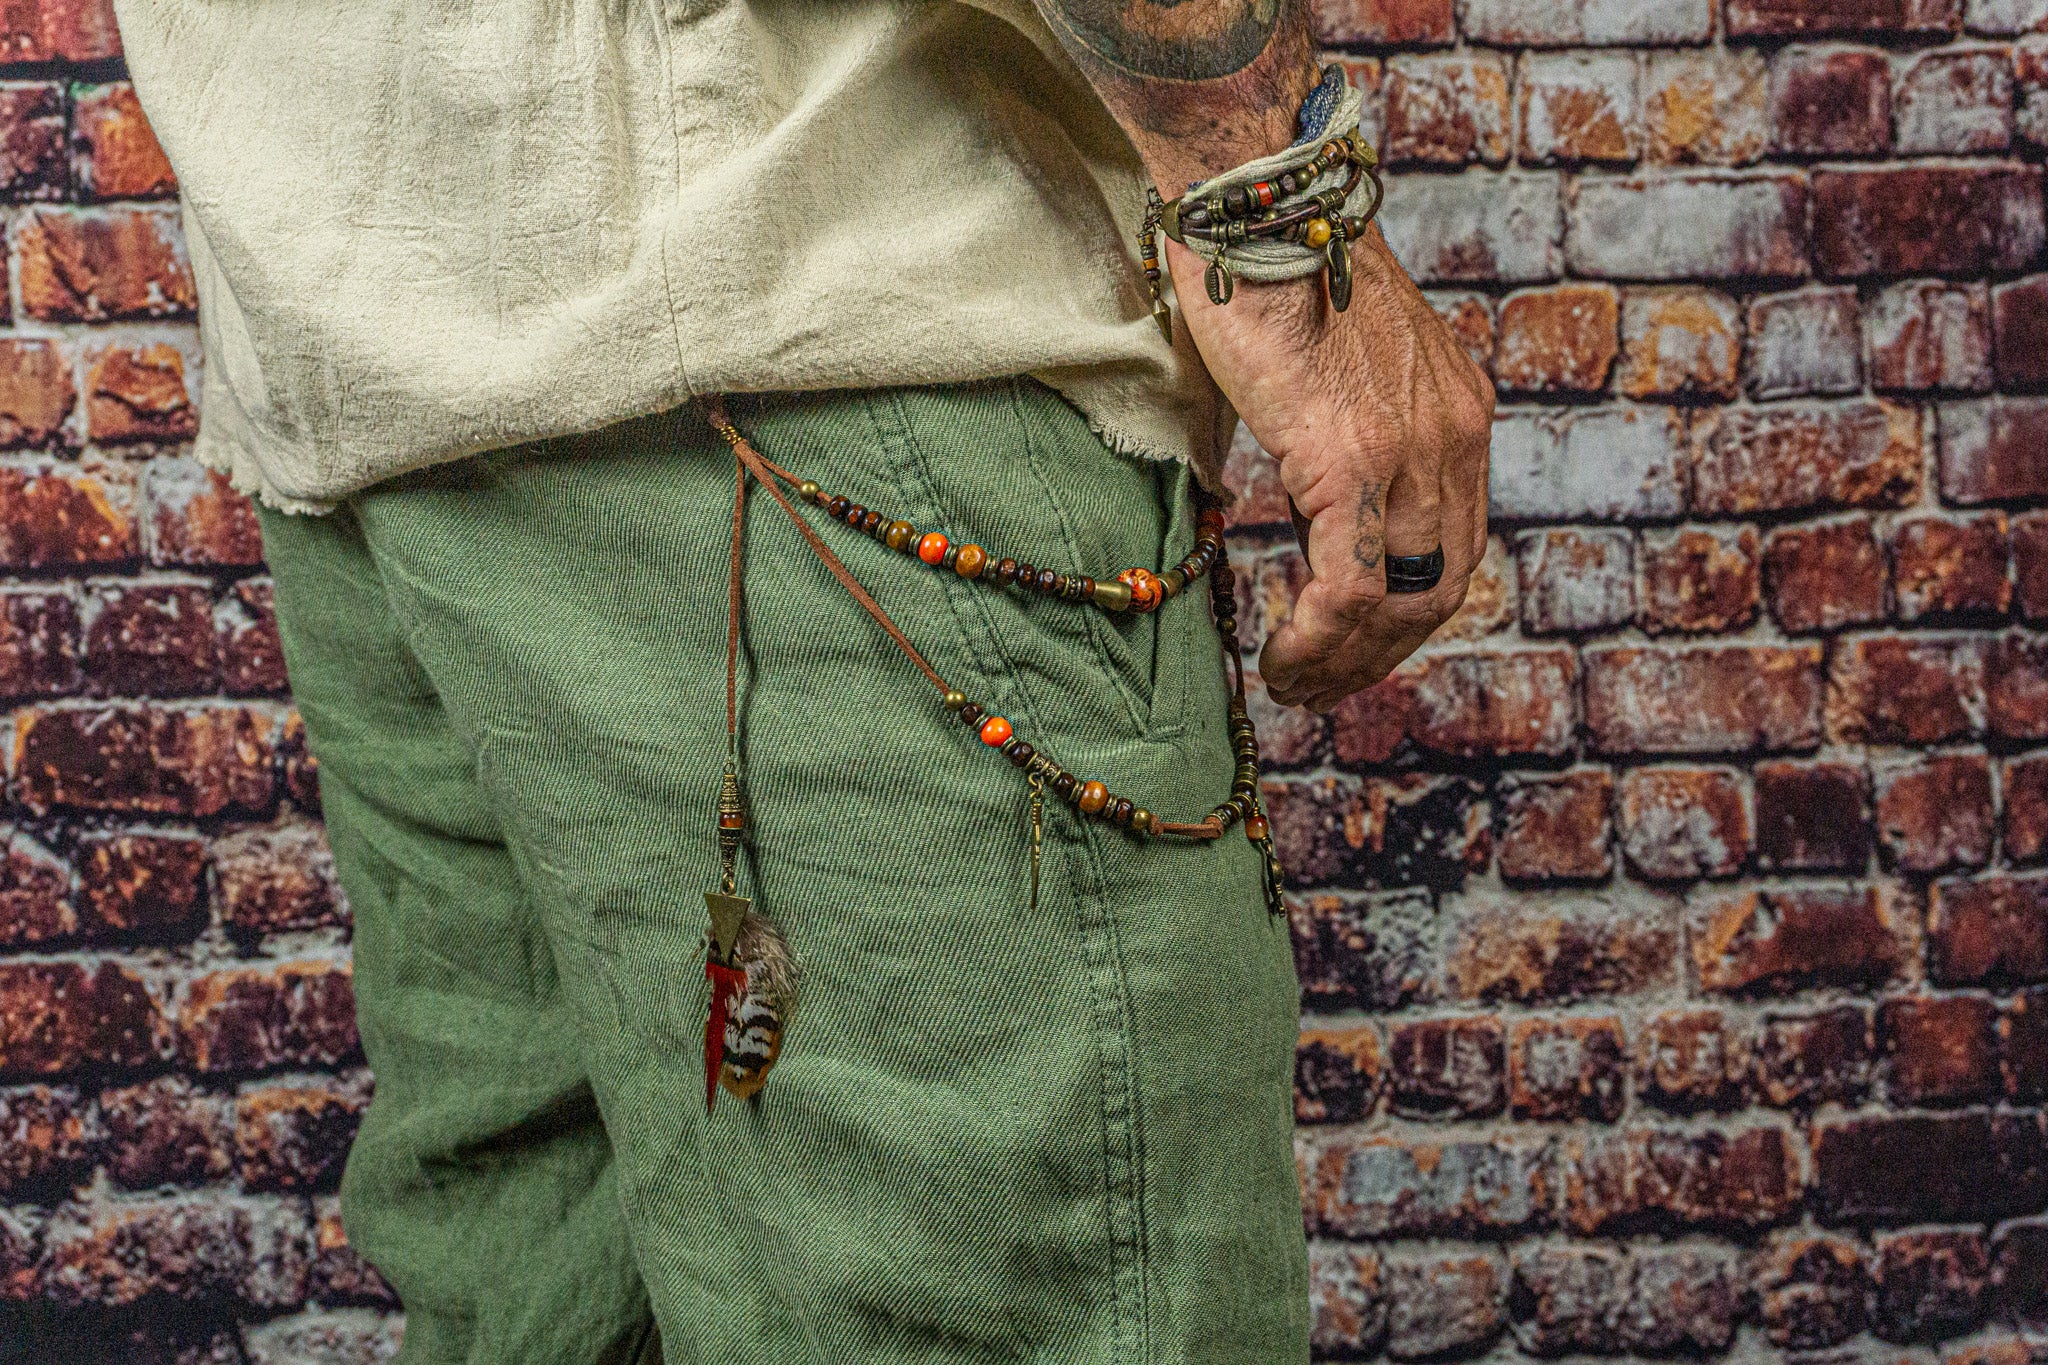 Bohemian Pirate Accessory: Layered Leather Beaded Pants Chain